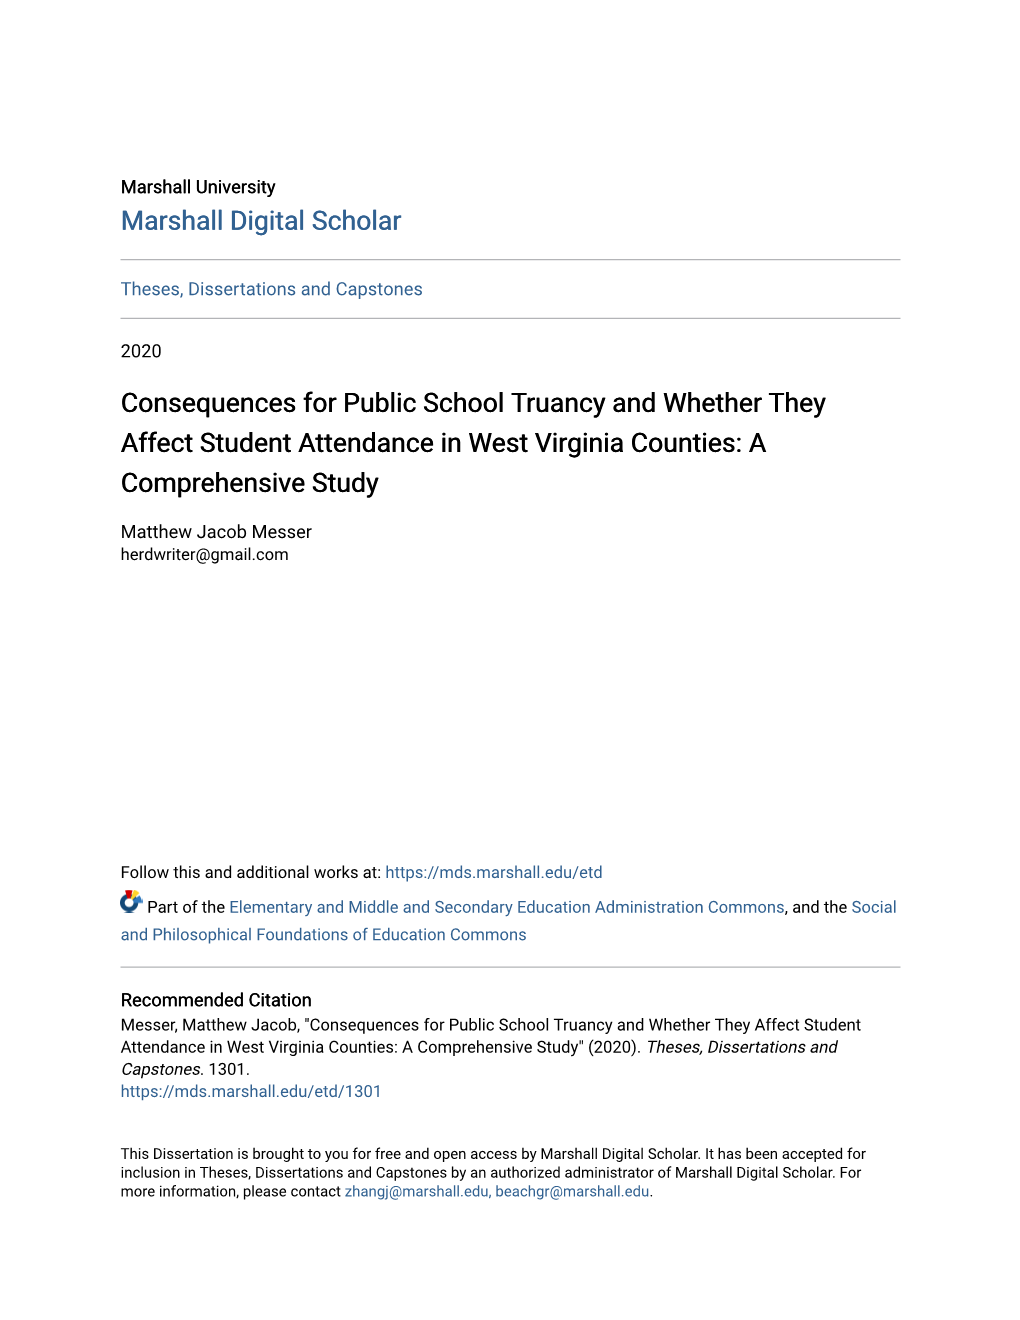 Consequences for Public School Truancy and Whether They Affect Student Attendance in West Virginia Counties: a Comprehensive Study